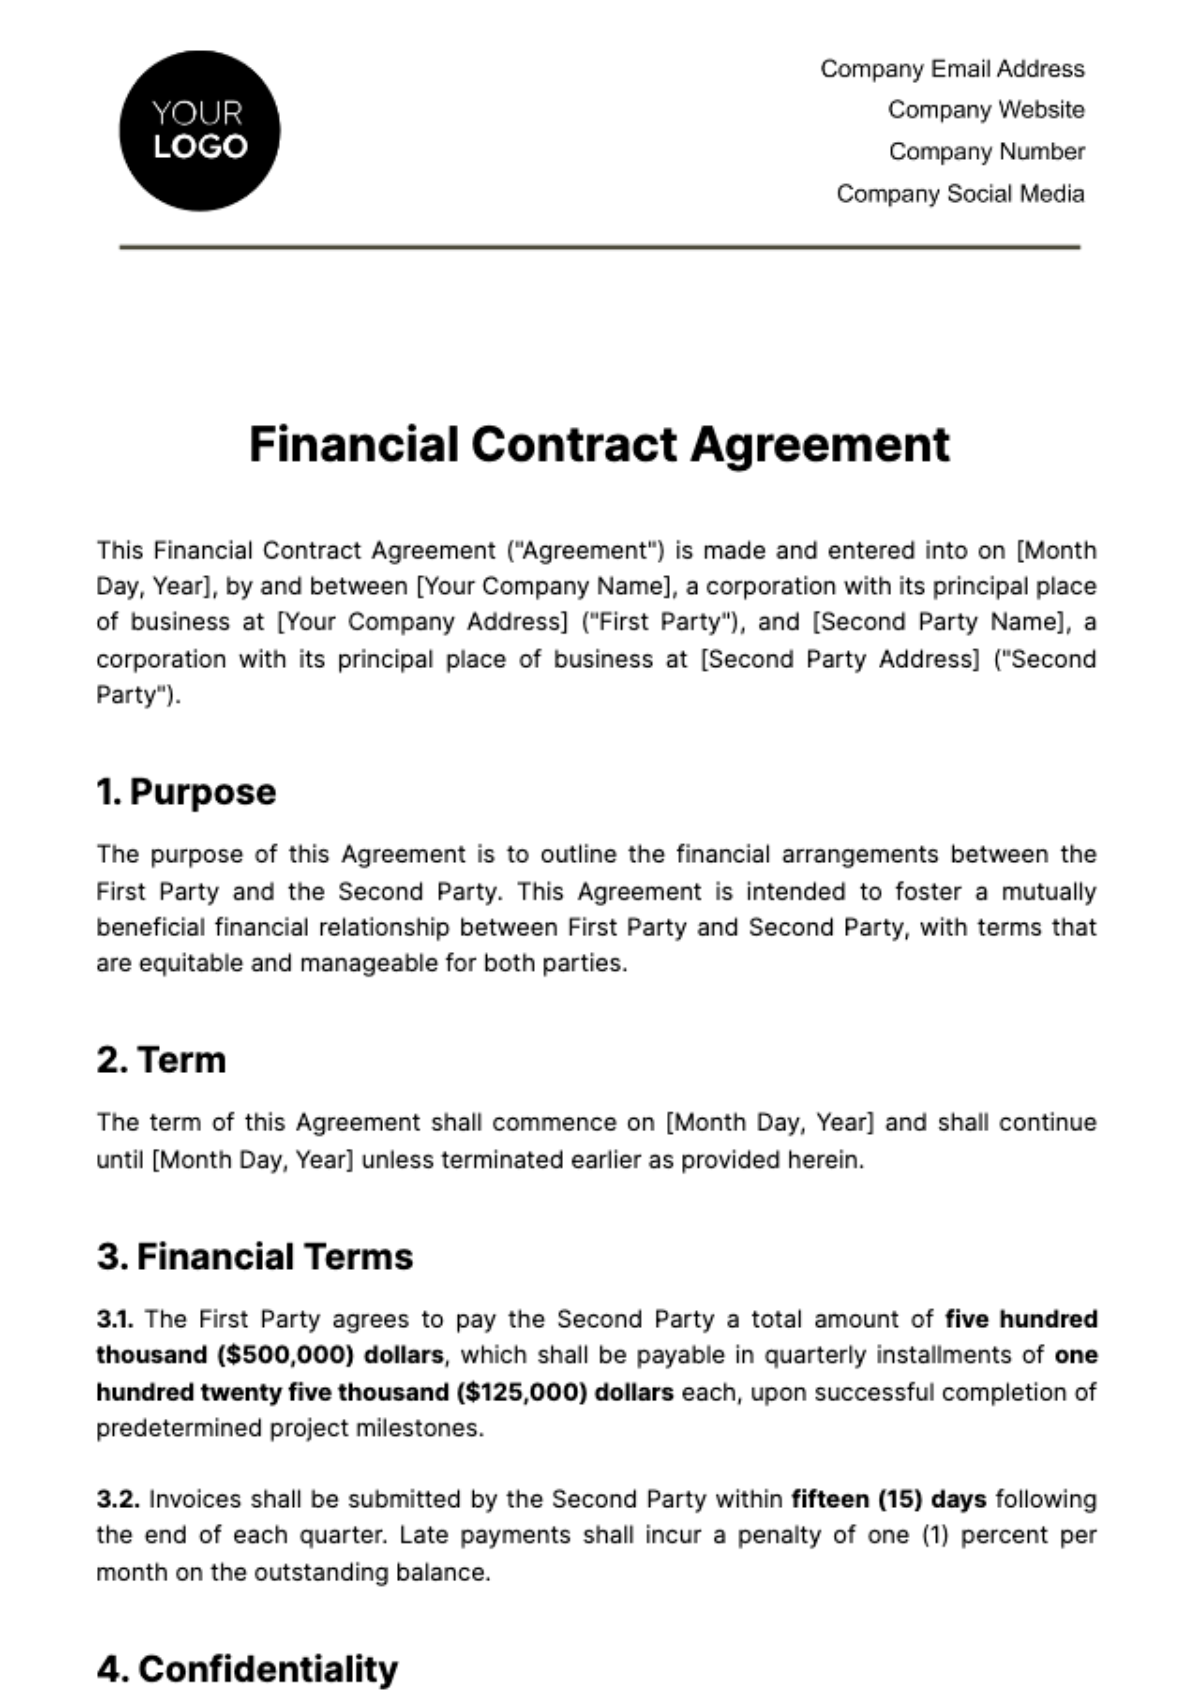 Free Financial Contract Agreement Template